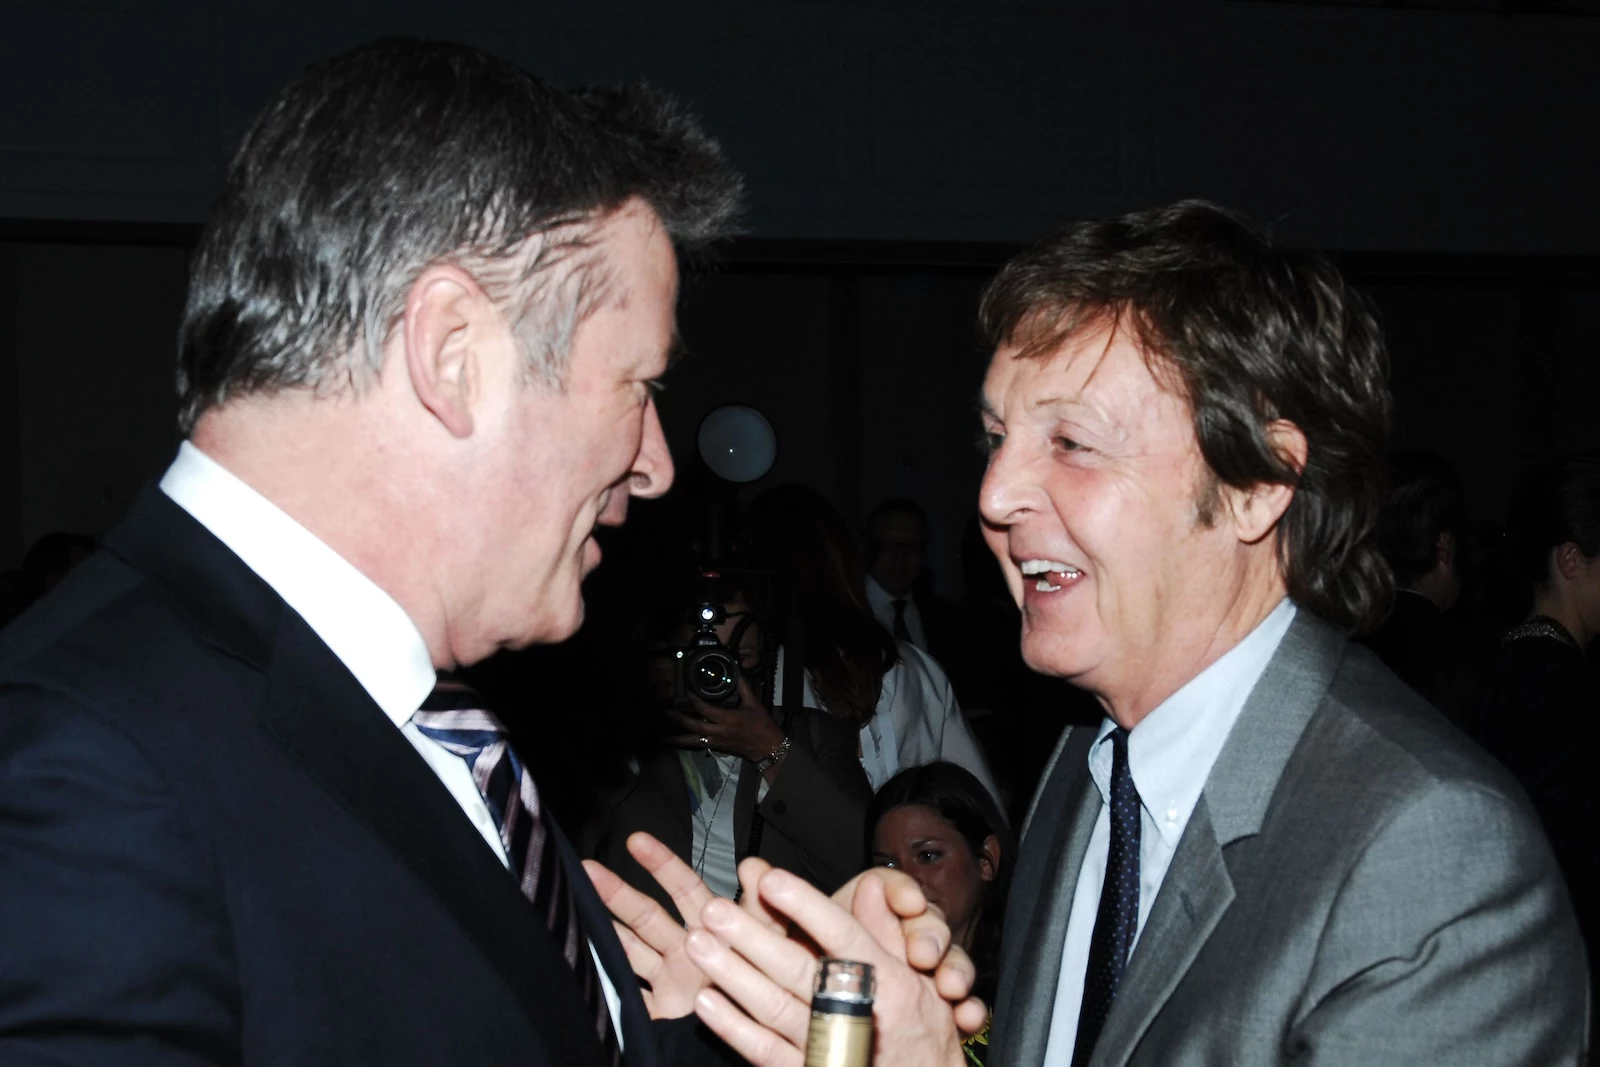 Why Alec Baldwin Called Paul McCartney an ‘A–hole’ to His Face